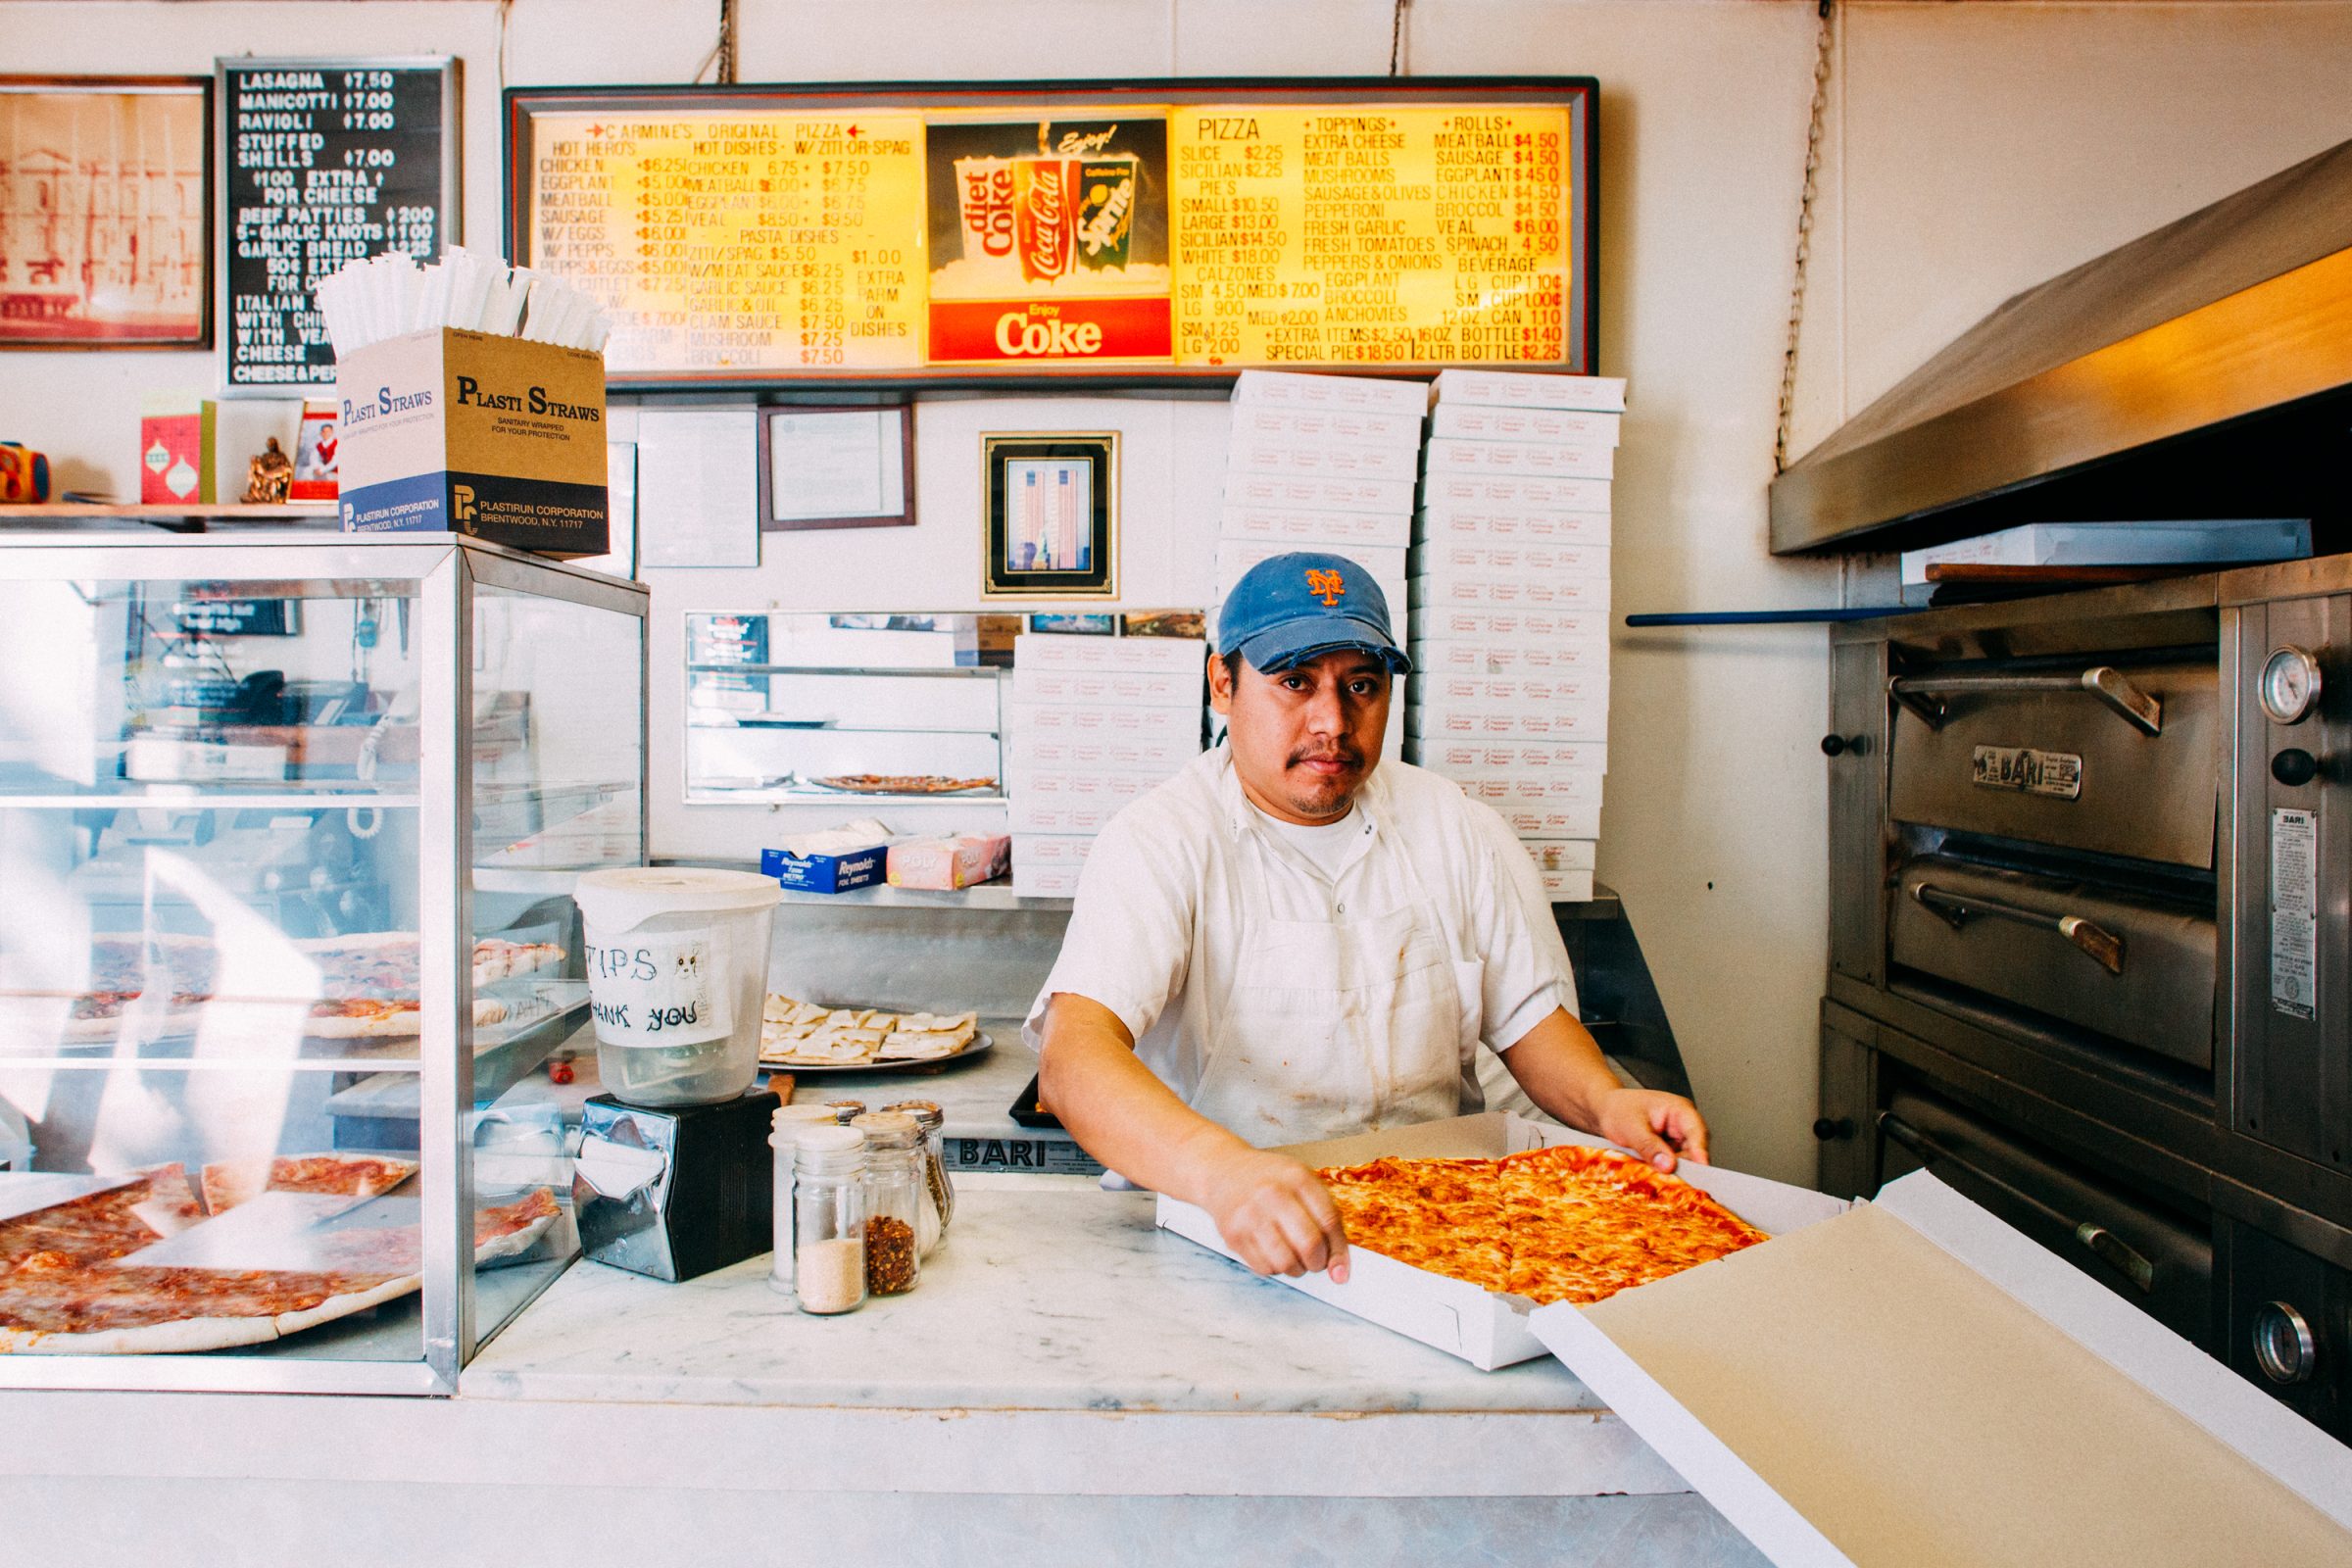 The New York Pizza Project